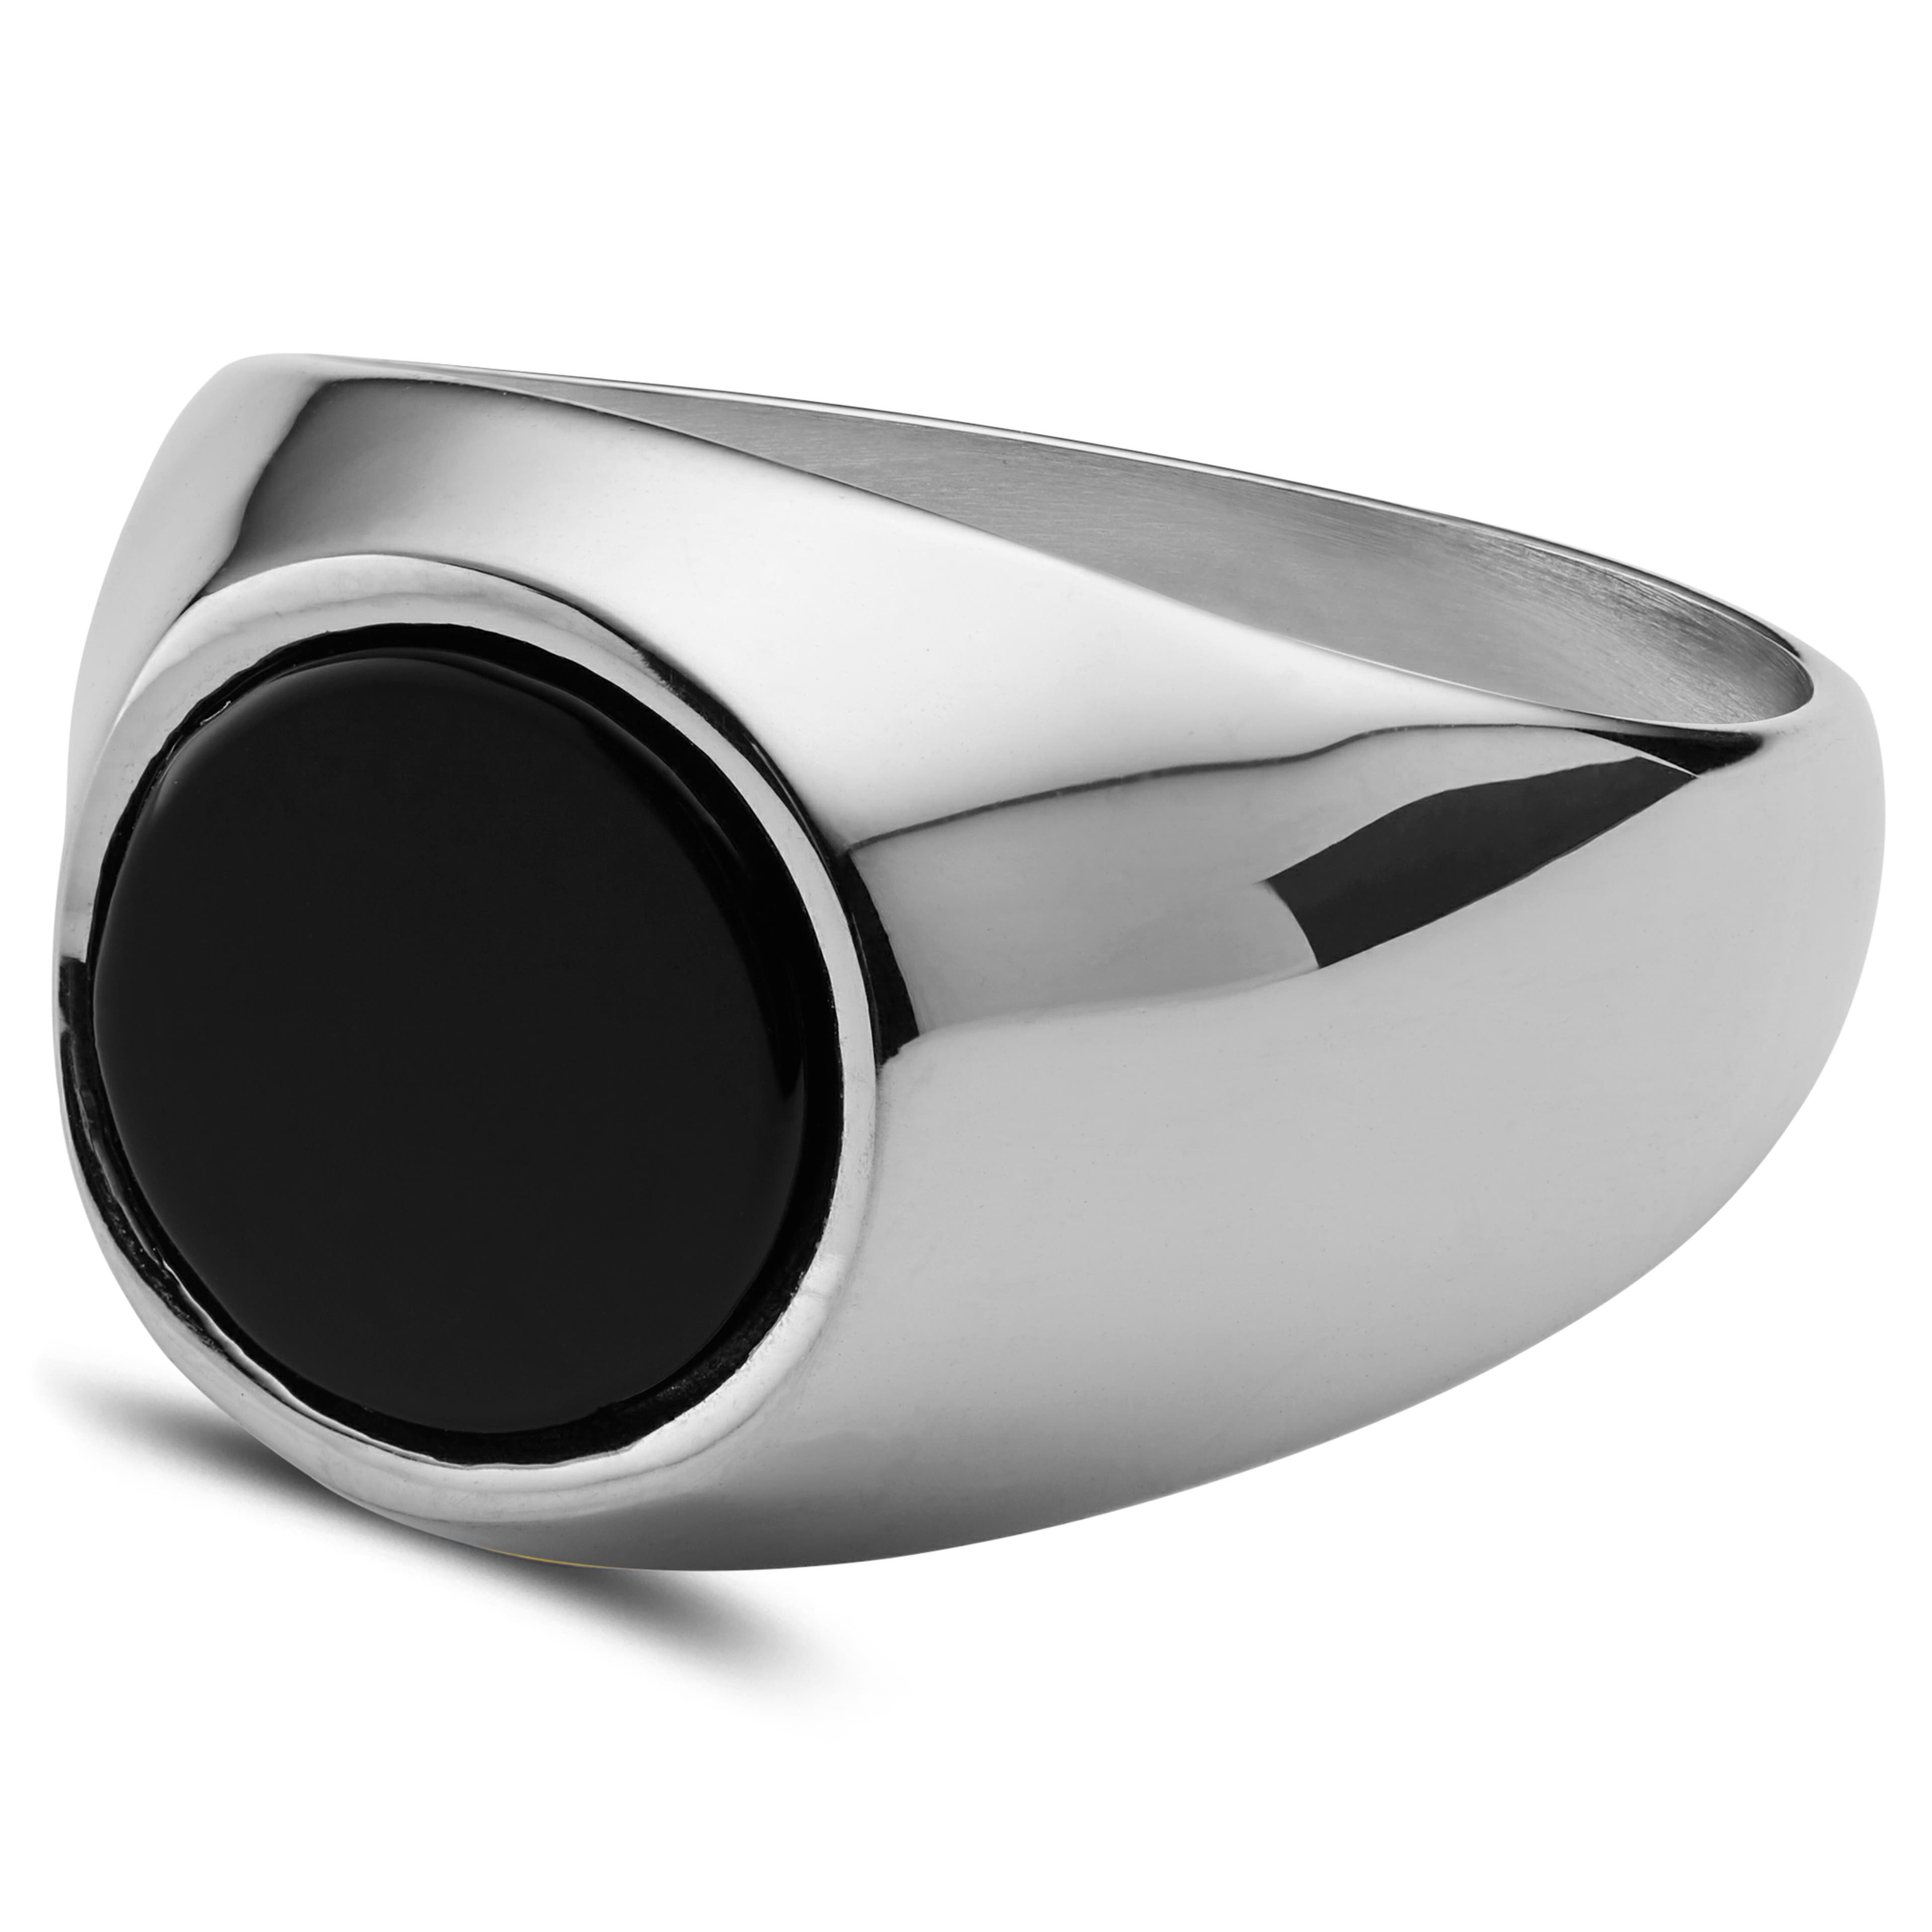 Ferrum | 8 mm Brushed & Polished Silver-Tone Stainless Steel Double Grooved  Ring